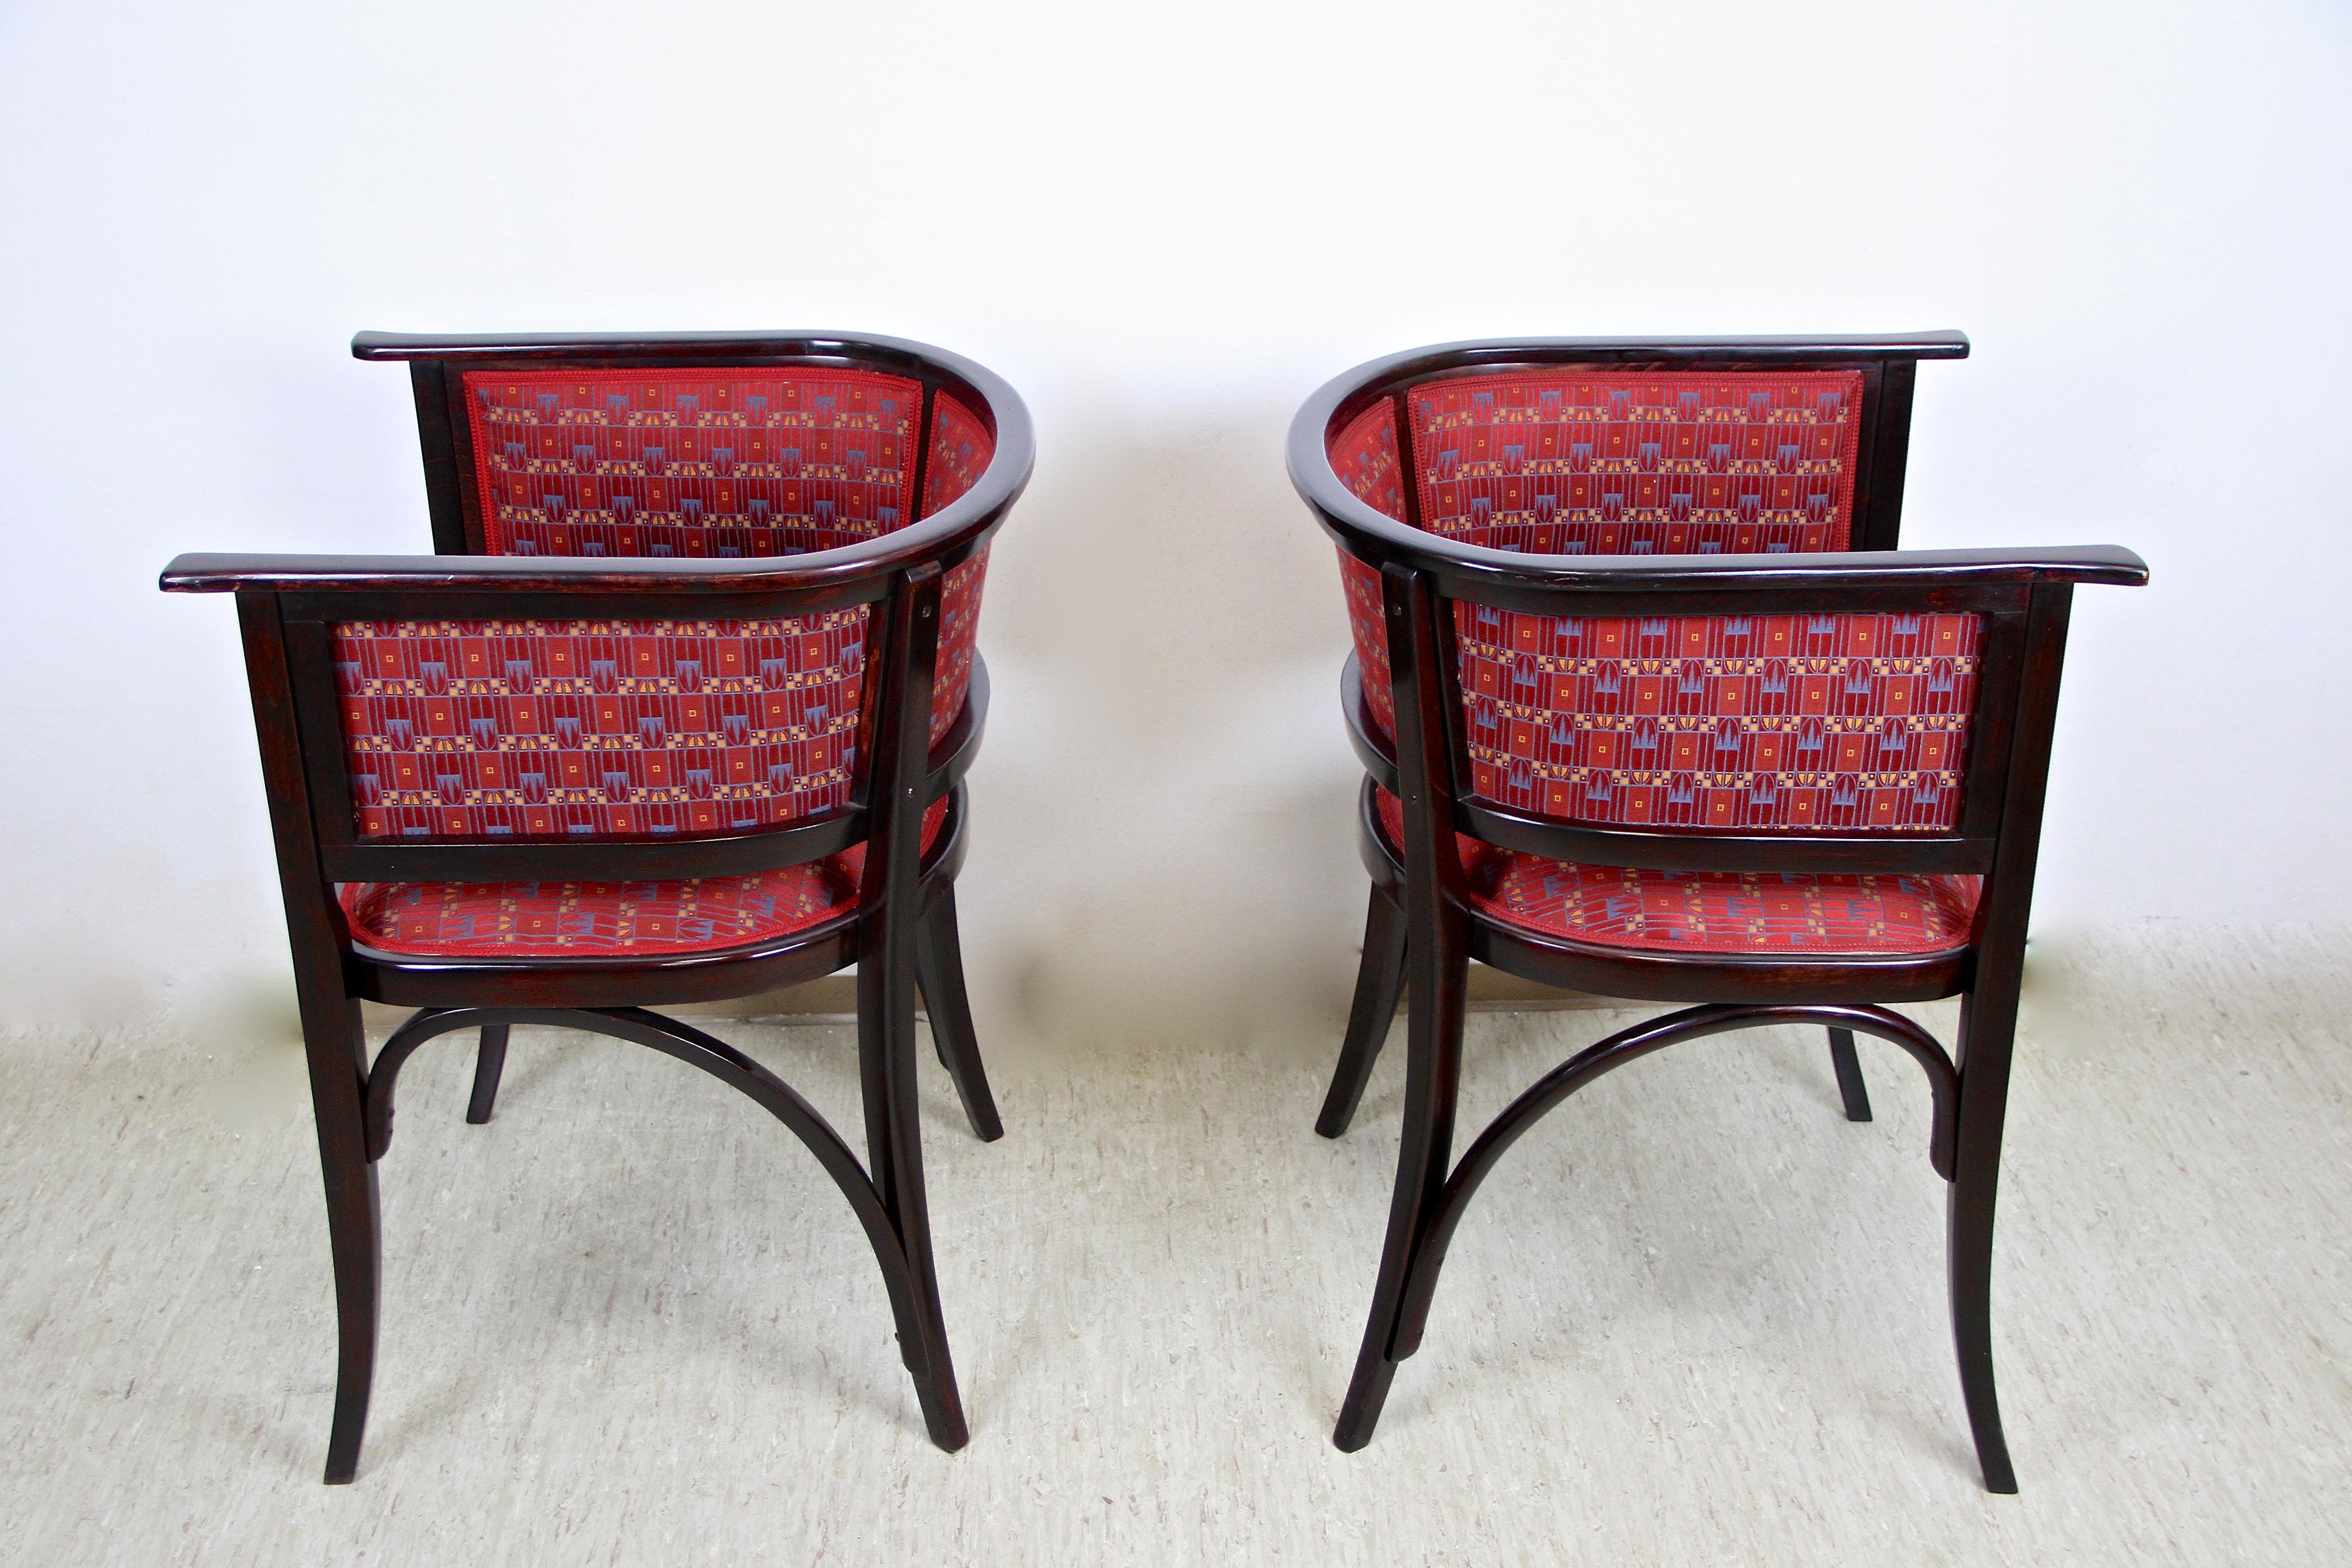 Thonet Bentwood Seating Set with Two Armchairs and Bench, Austria, circa 1910 11